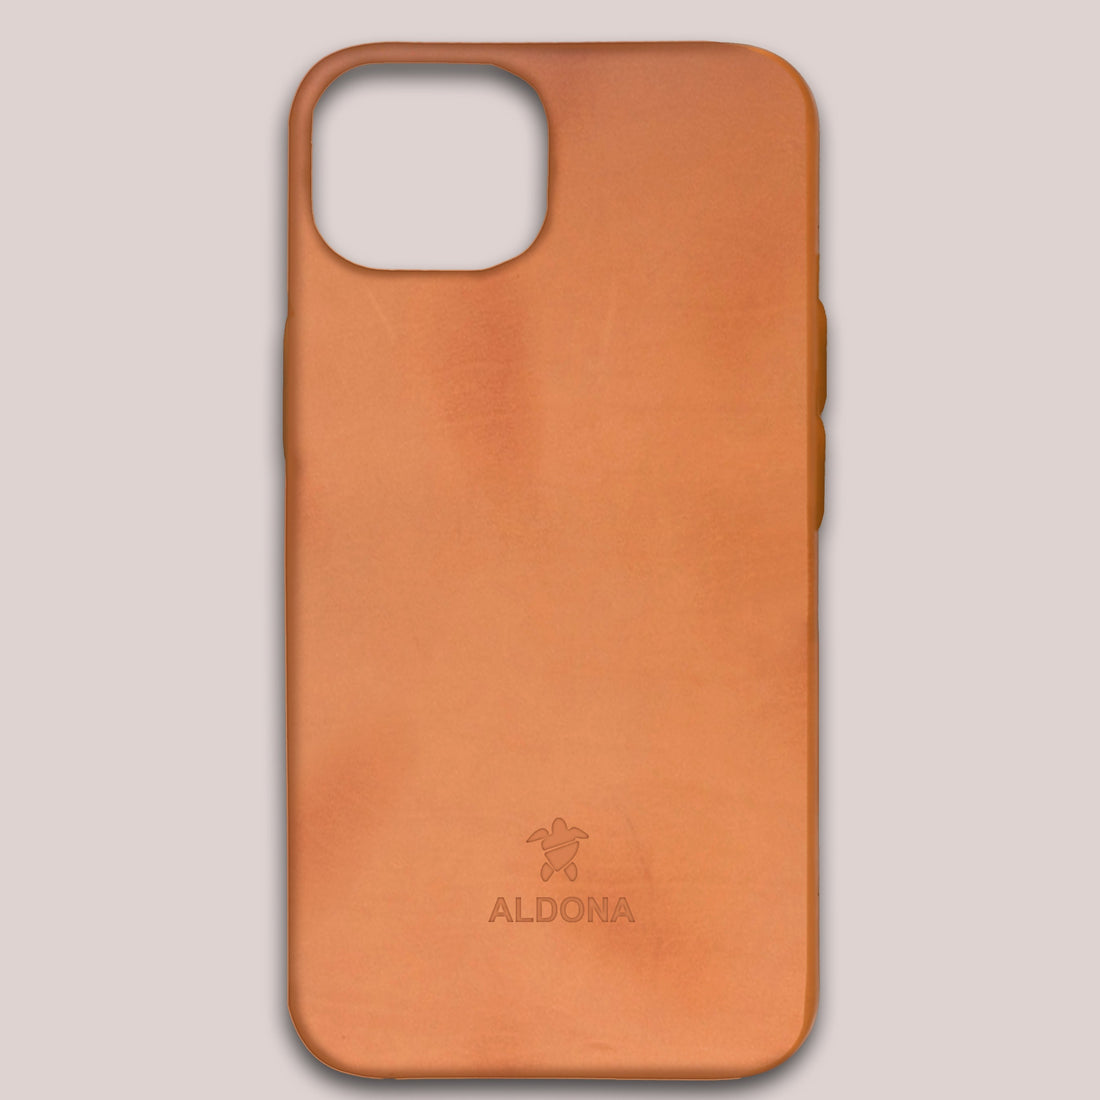 Kalon Case for iPhone 12 Mini series with MagSafe Compatibility - Vintage Tan